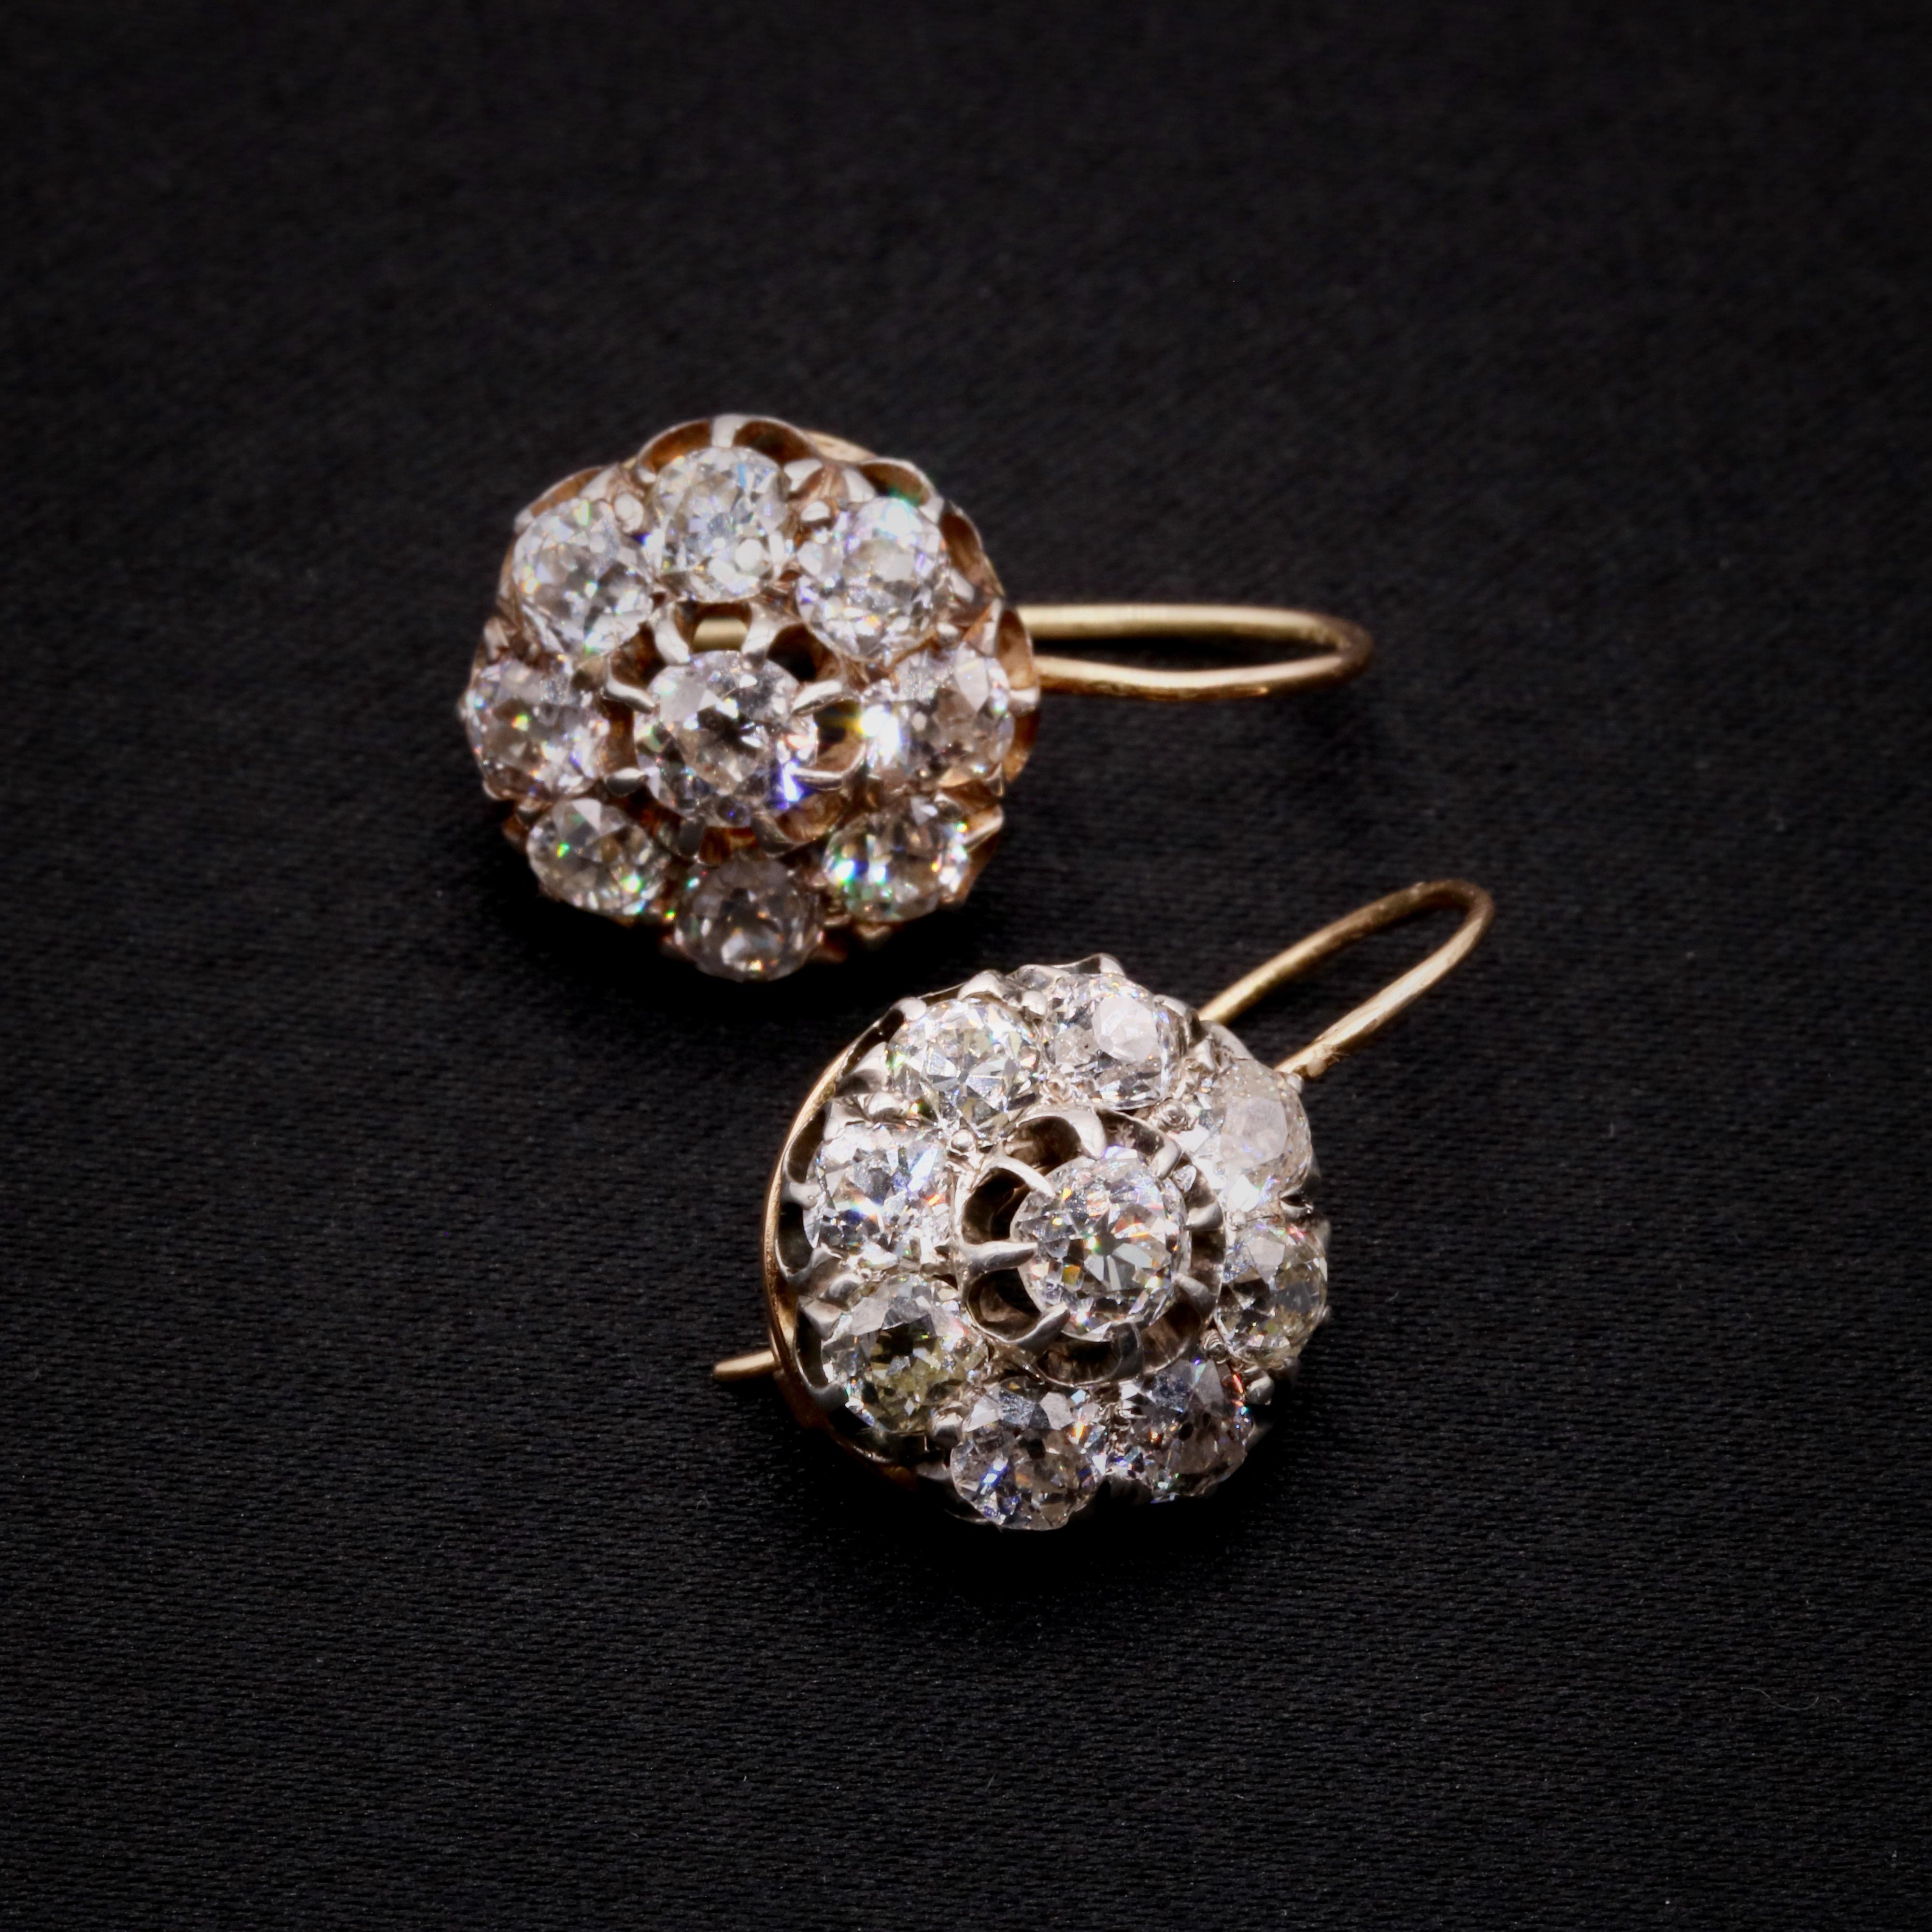 Old European Cut Antique Victorian 18K Gold & Silver 4.67ctw Old Cut Diamond Cluster Earring For Sale